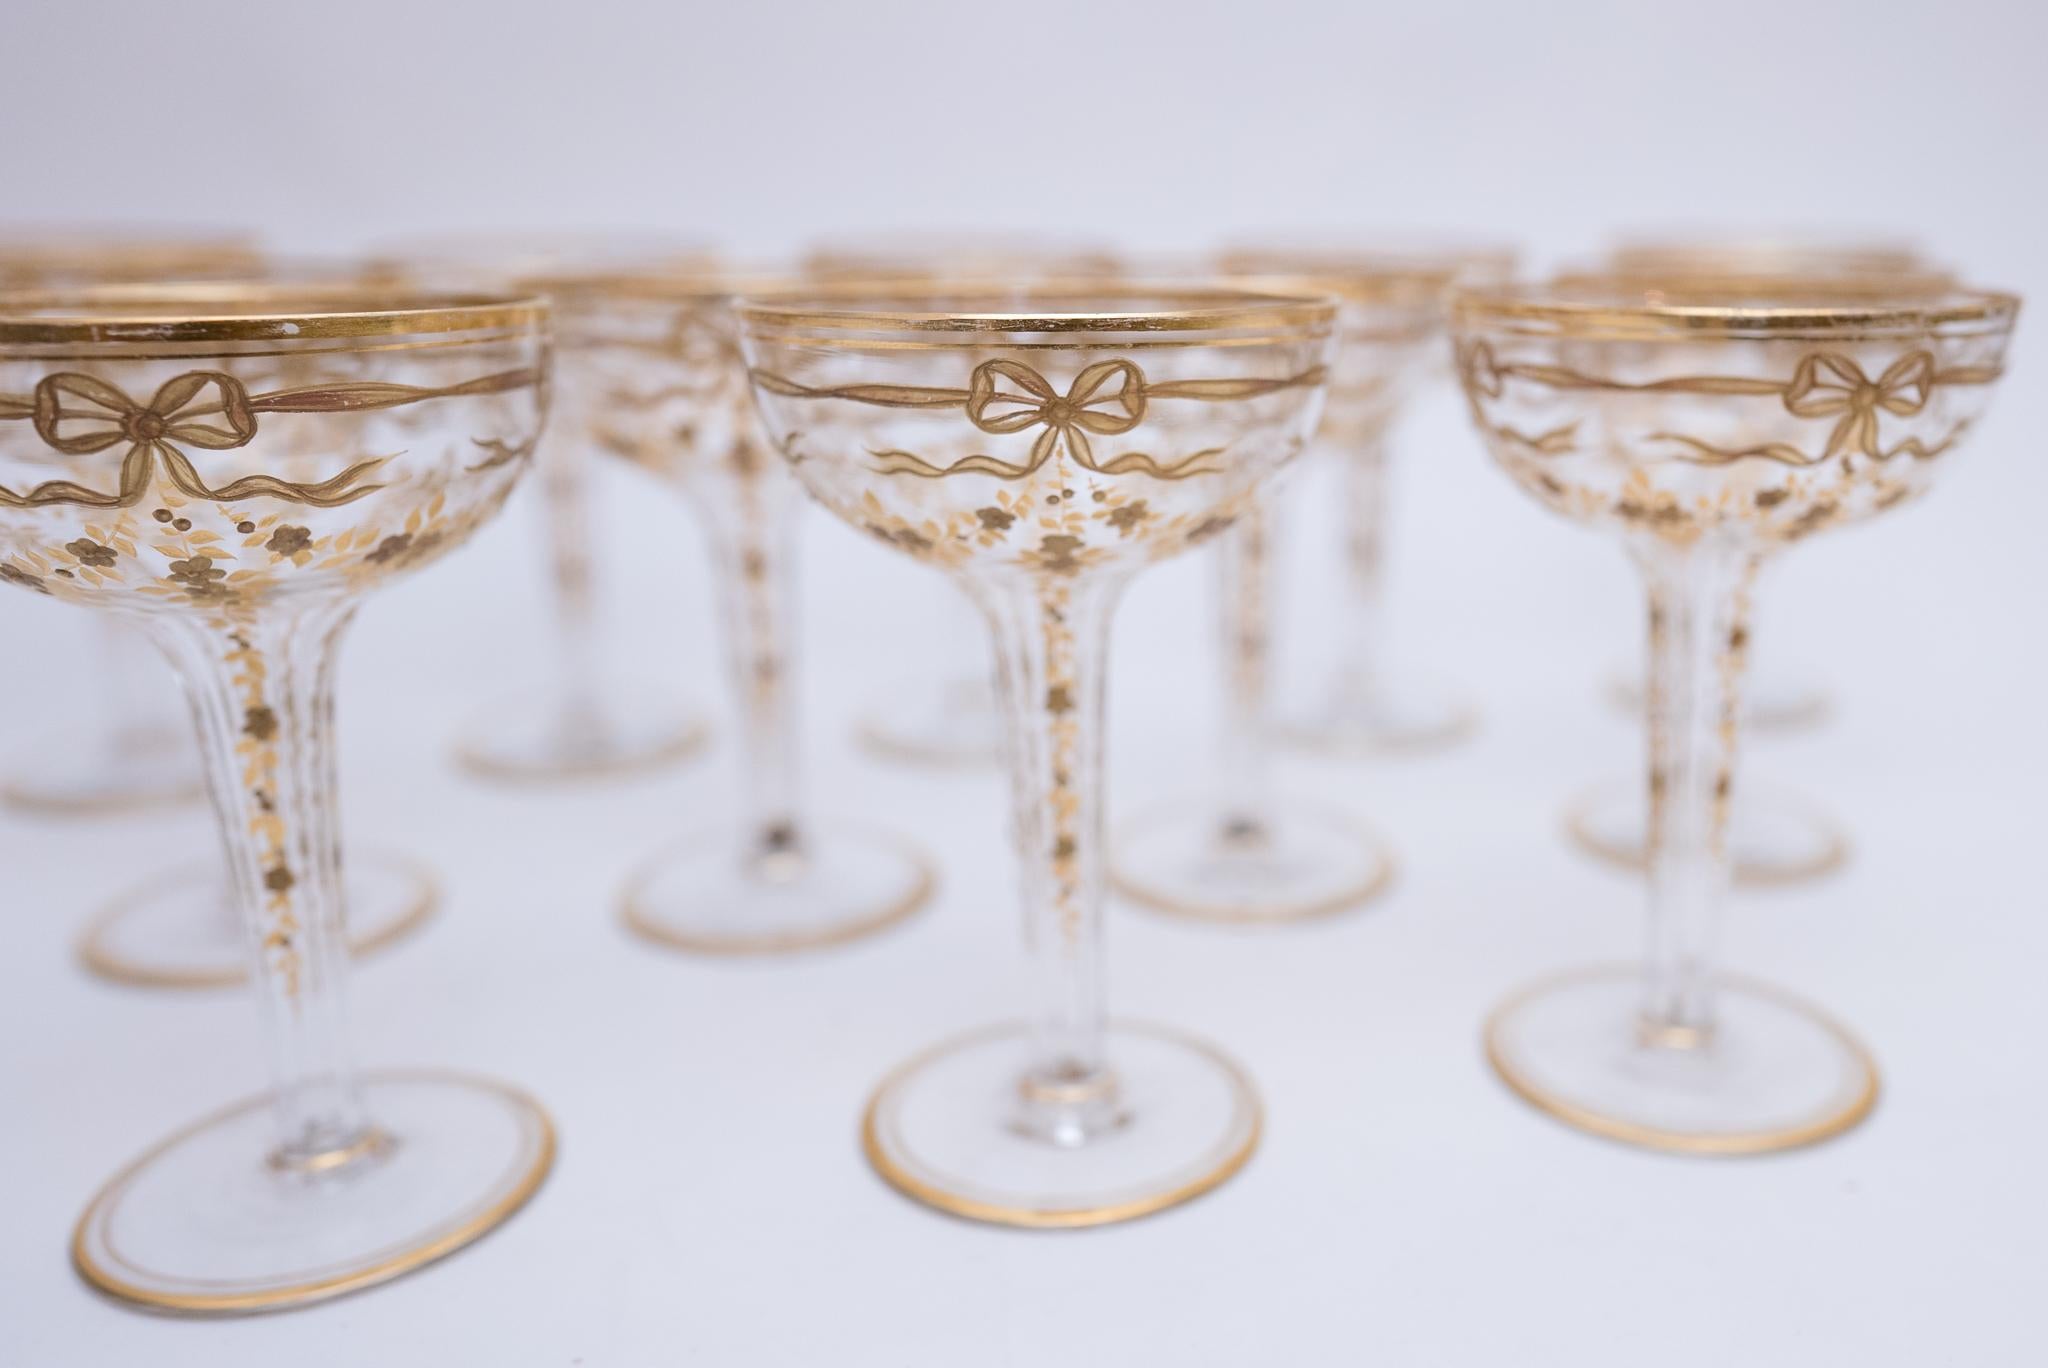 We were delighted to find a set of 12 antique hollow stem champagne glasses with all this pretty raised gilding throughout, all the way down their stems. They feature a swag and bow along with the floral garlands that trellis down to their bases. We